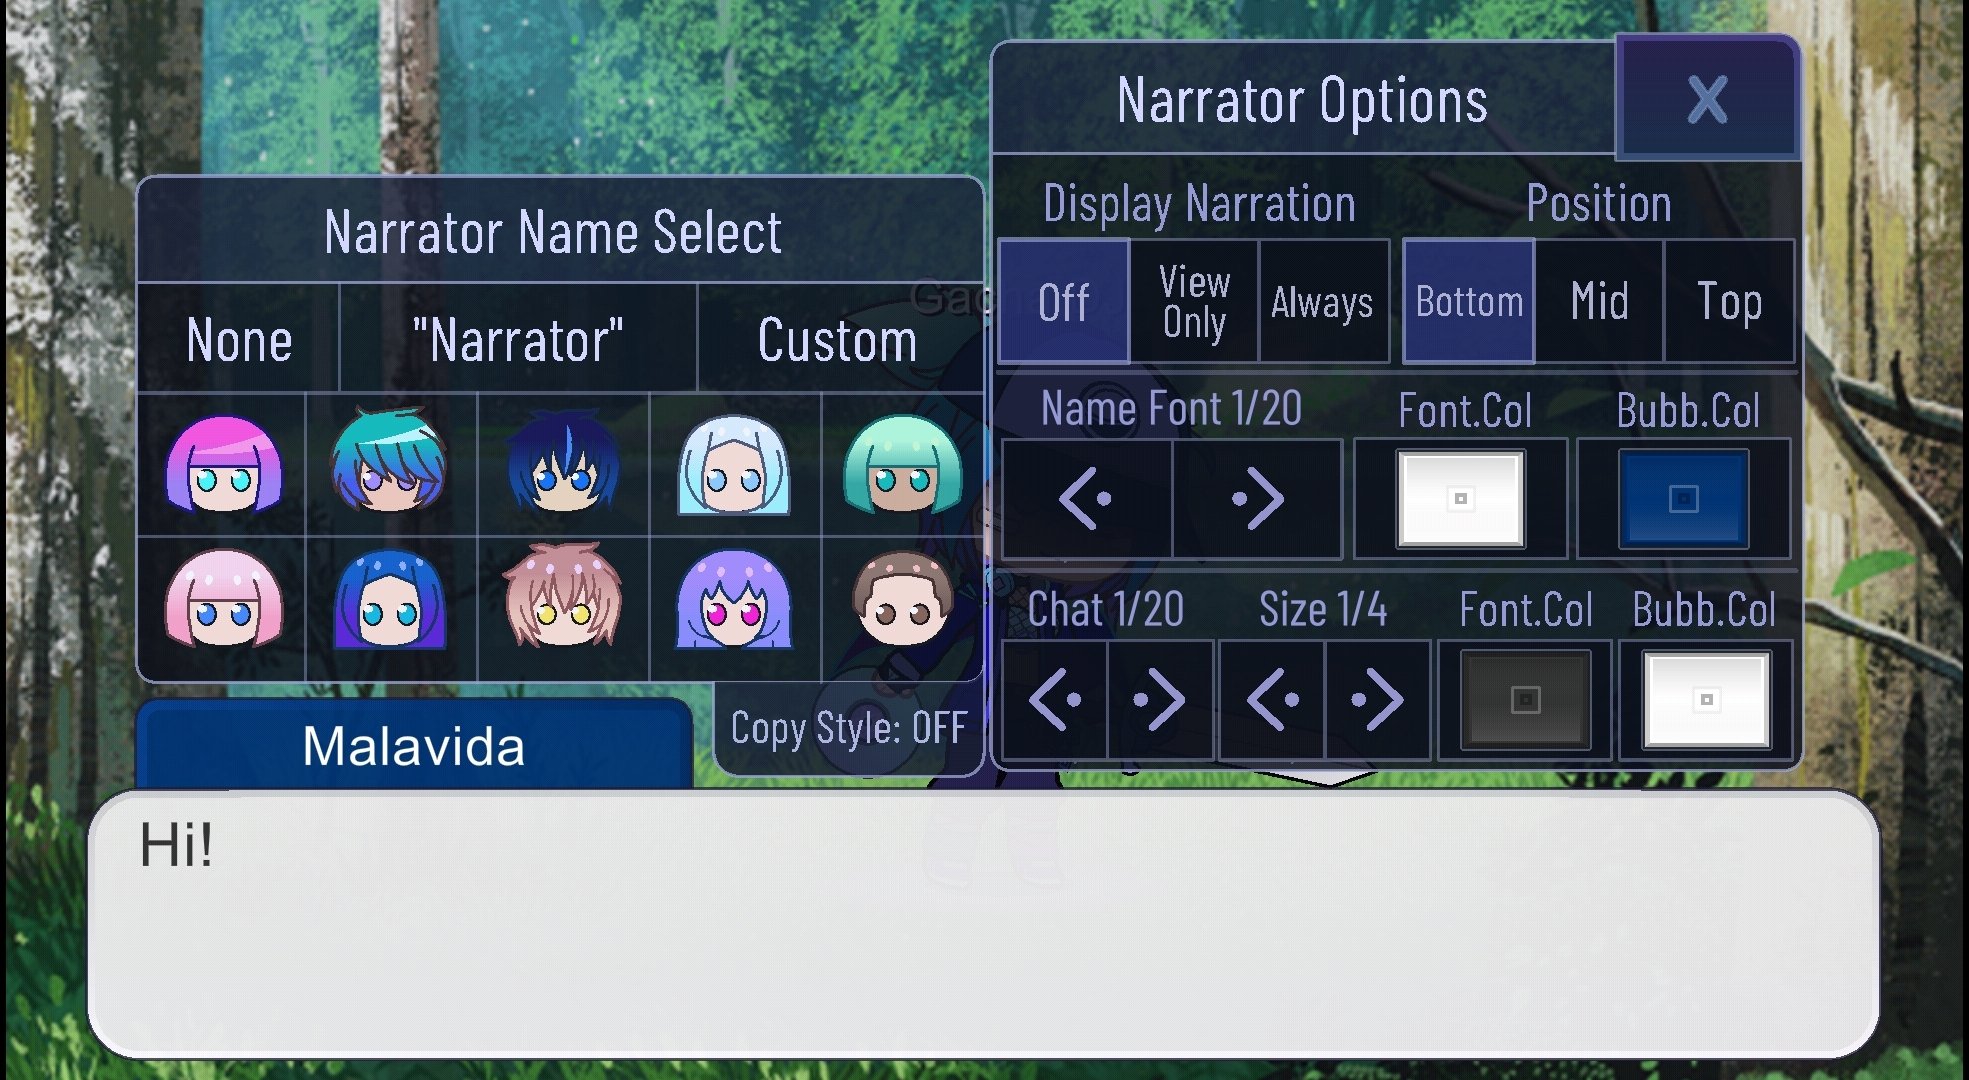 About: Gacha Plus+ Mod Coloring (Google Play version)